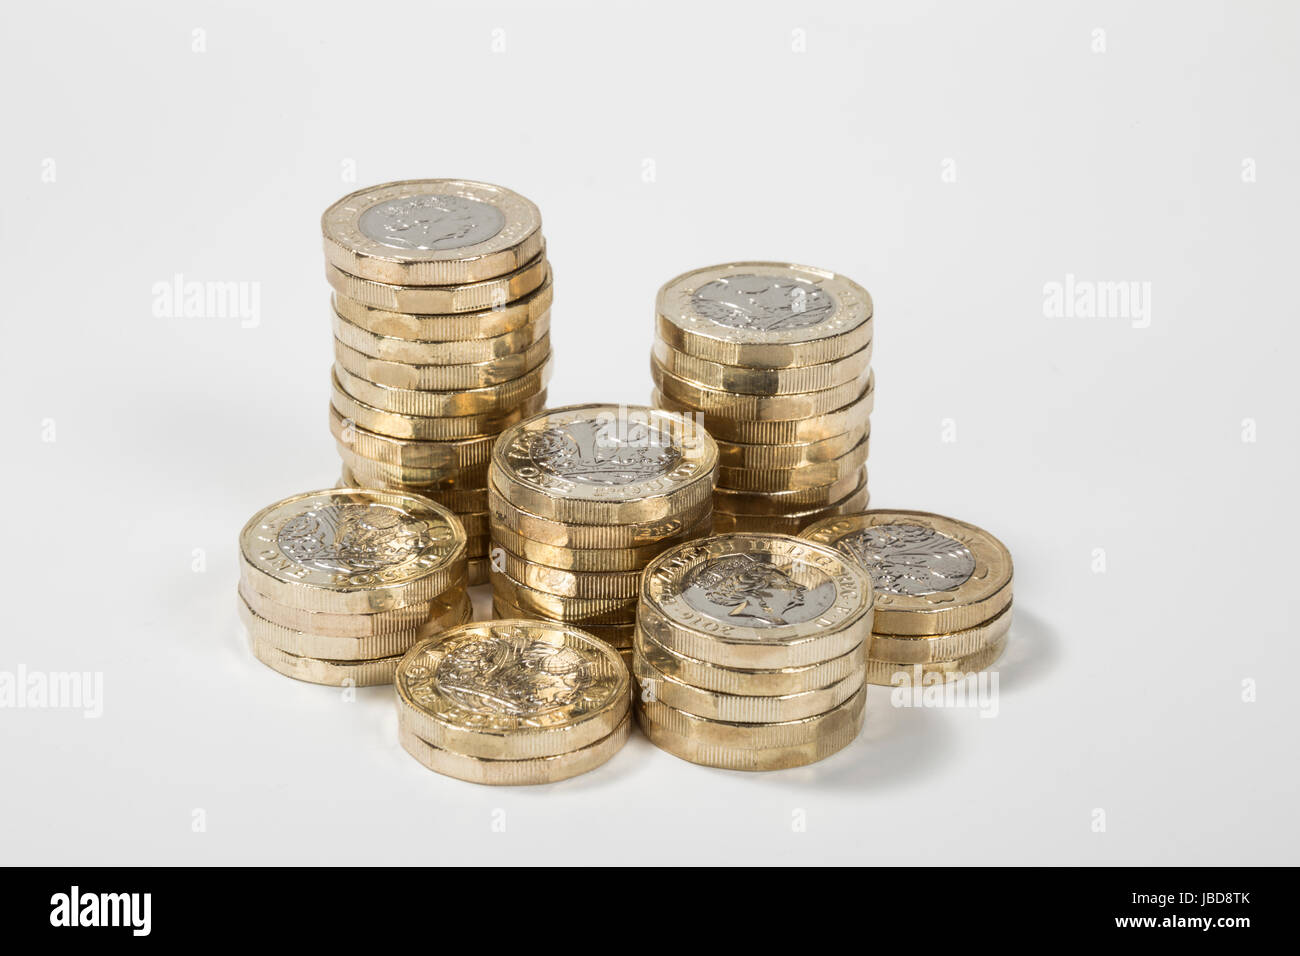 New UK British Pound coins in vertical piles Stock Photo